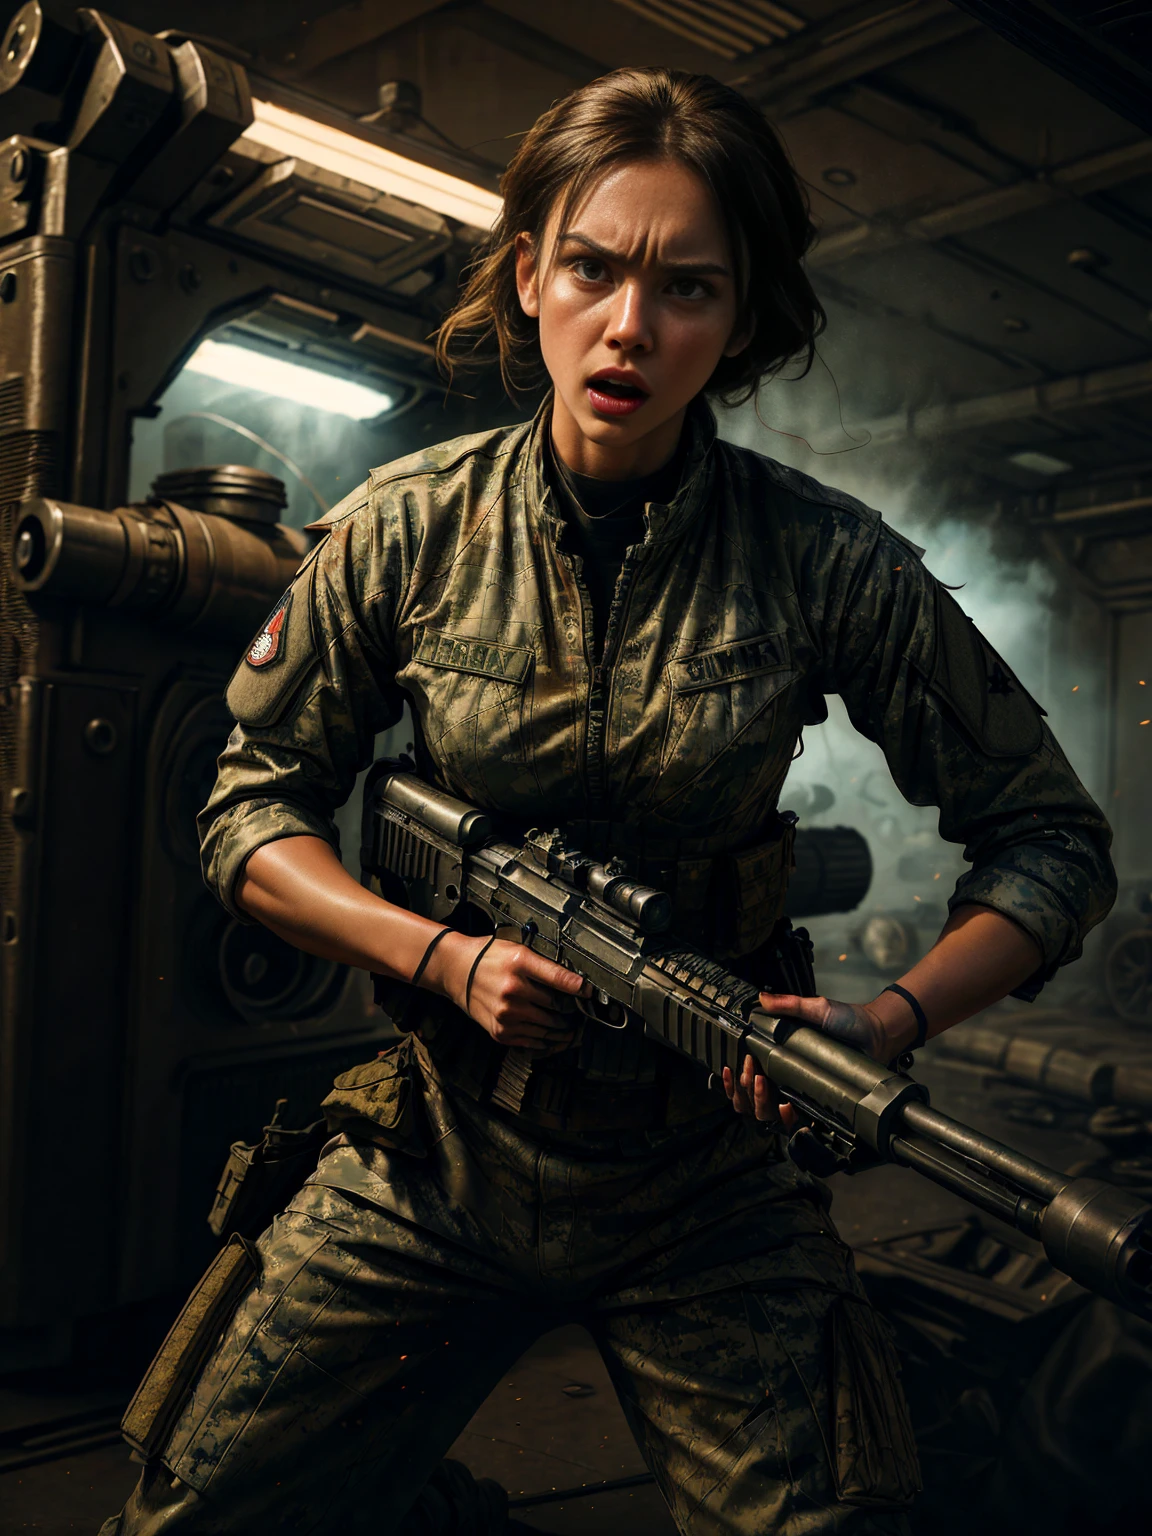 beautiful young woman in tight combat suit:1.3, holding a machine gun, action pose, looking at viewer:1.2, blurred background, gritty photo, HD, 8k, hyper realistic, chiaroscuro lighting, military aesthetics, high-tech weapon, expression intense, muscular build, tactical equipment, cinematic composition